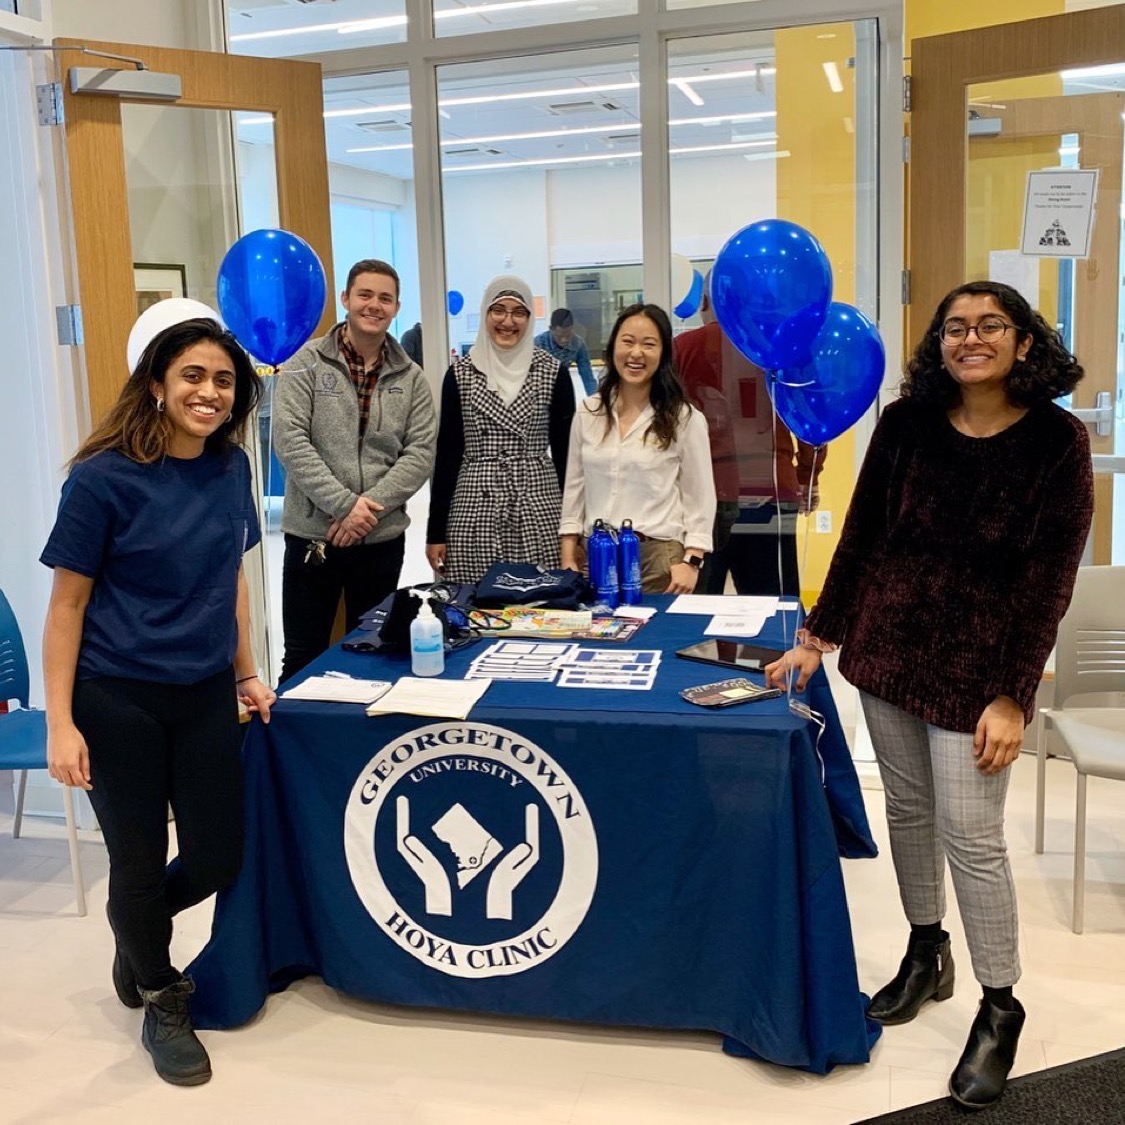 @GU_HOYA_Clinic not only serves The Triumph residents with their free clinic but also educates them through health fairs. The fair provided participants with resources on how stay healthy. We appreciate our students’ dedication to improving health in the city. #SocialJustice